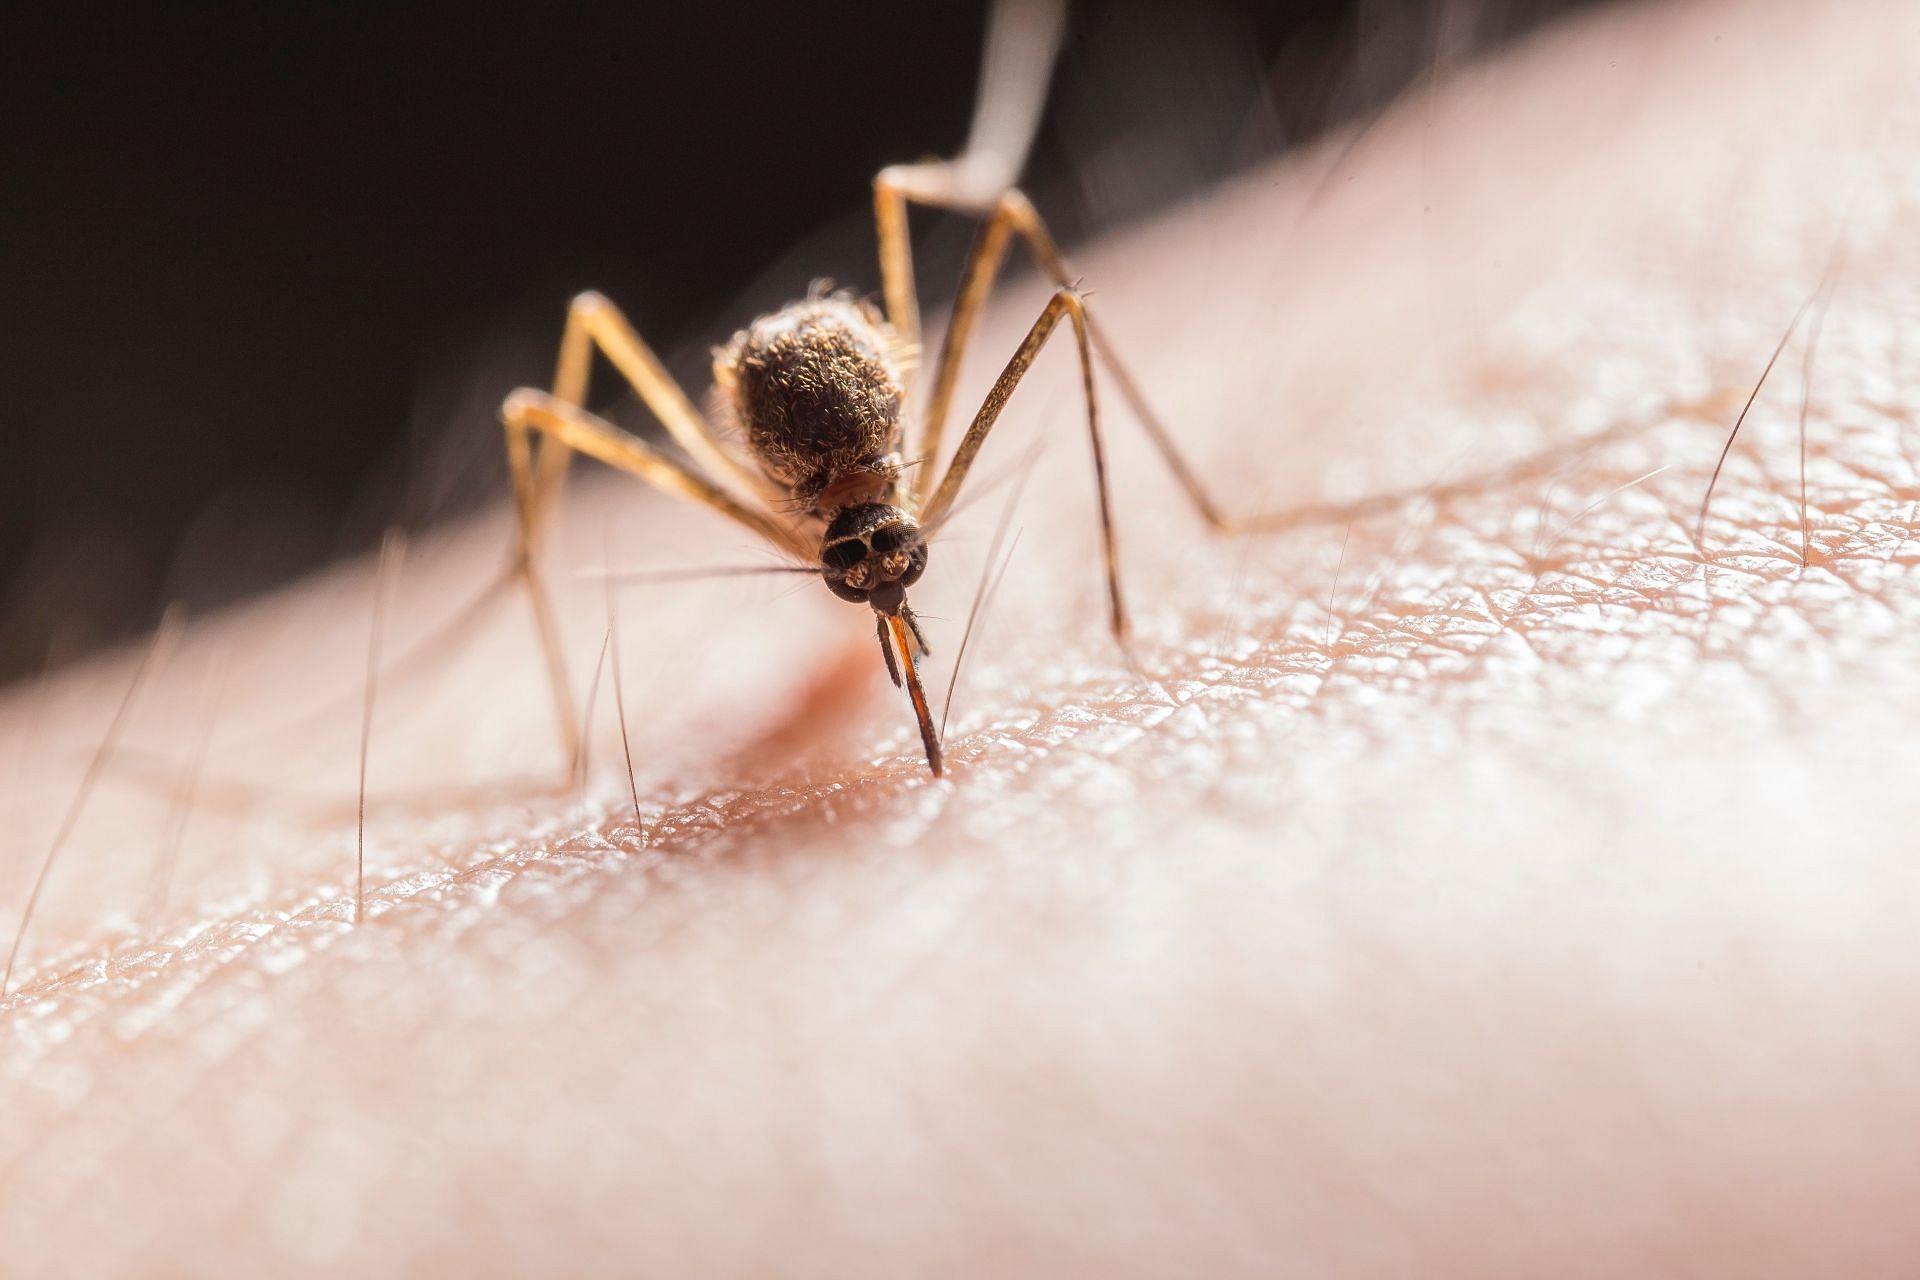 Why mosquito bites are itchy? (Image via Pexels/ Jimmy Chan)